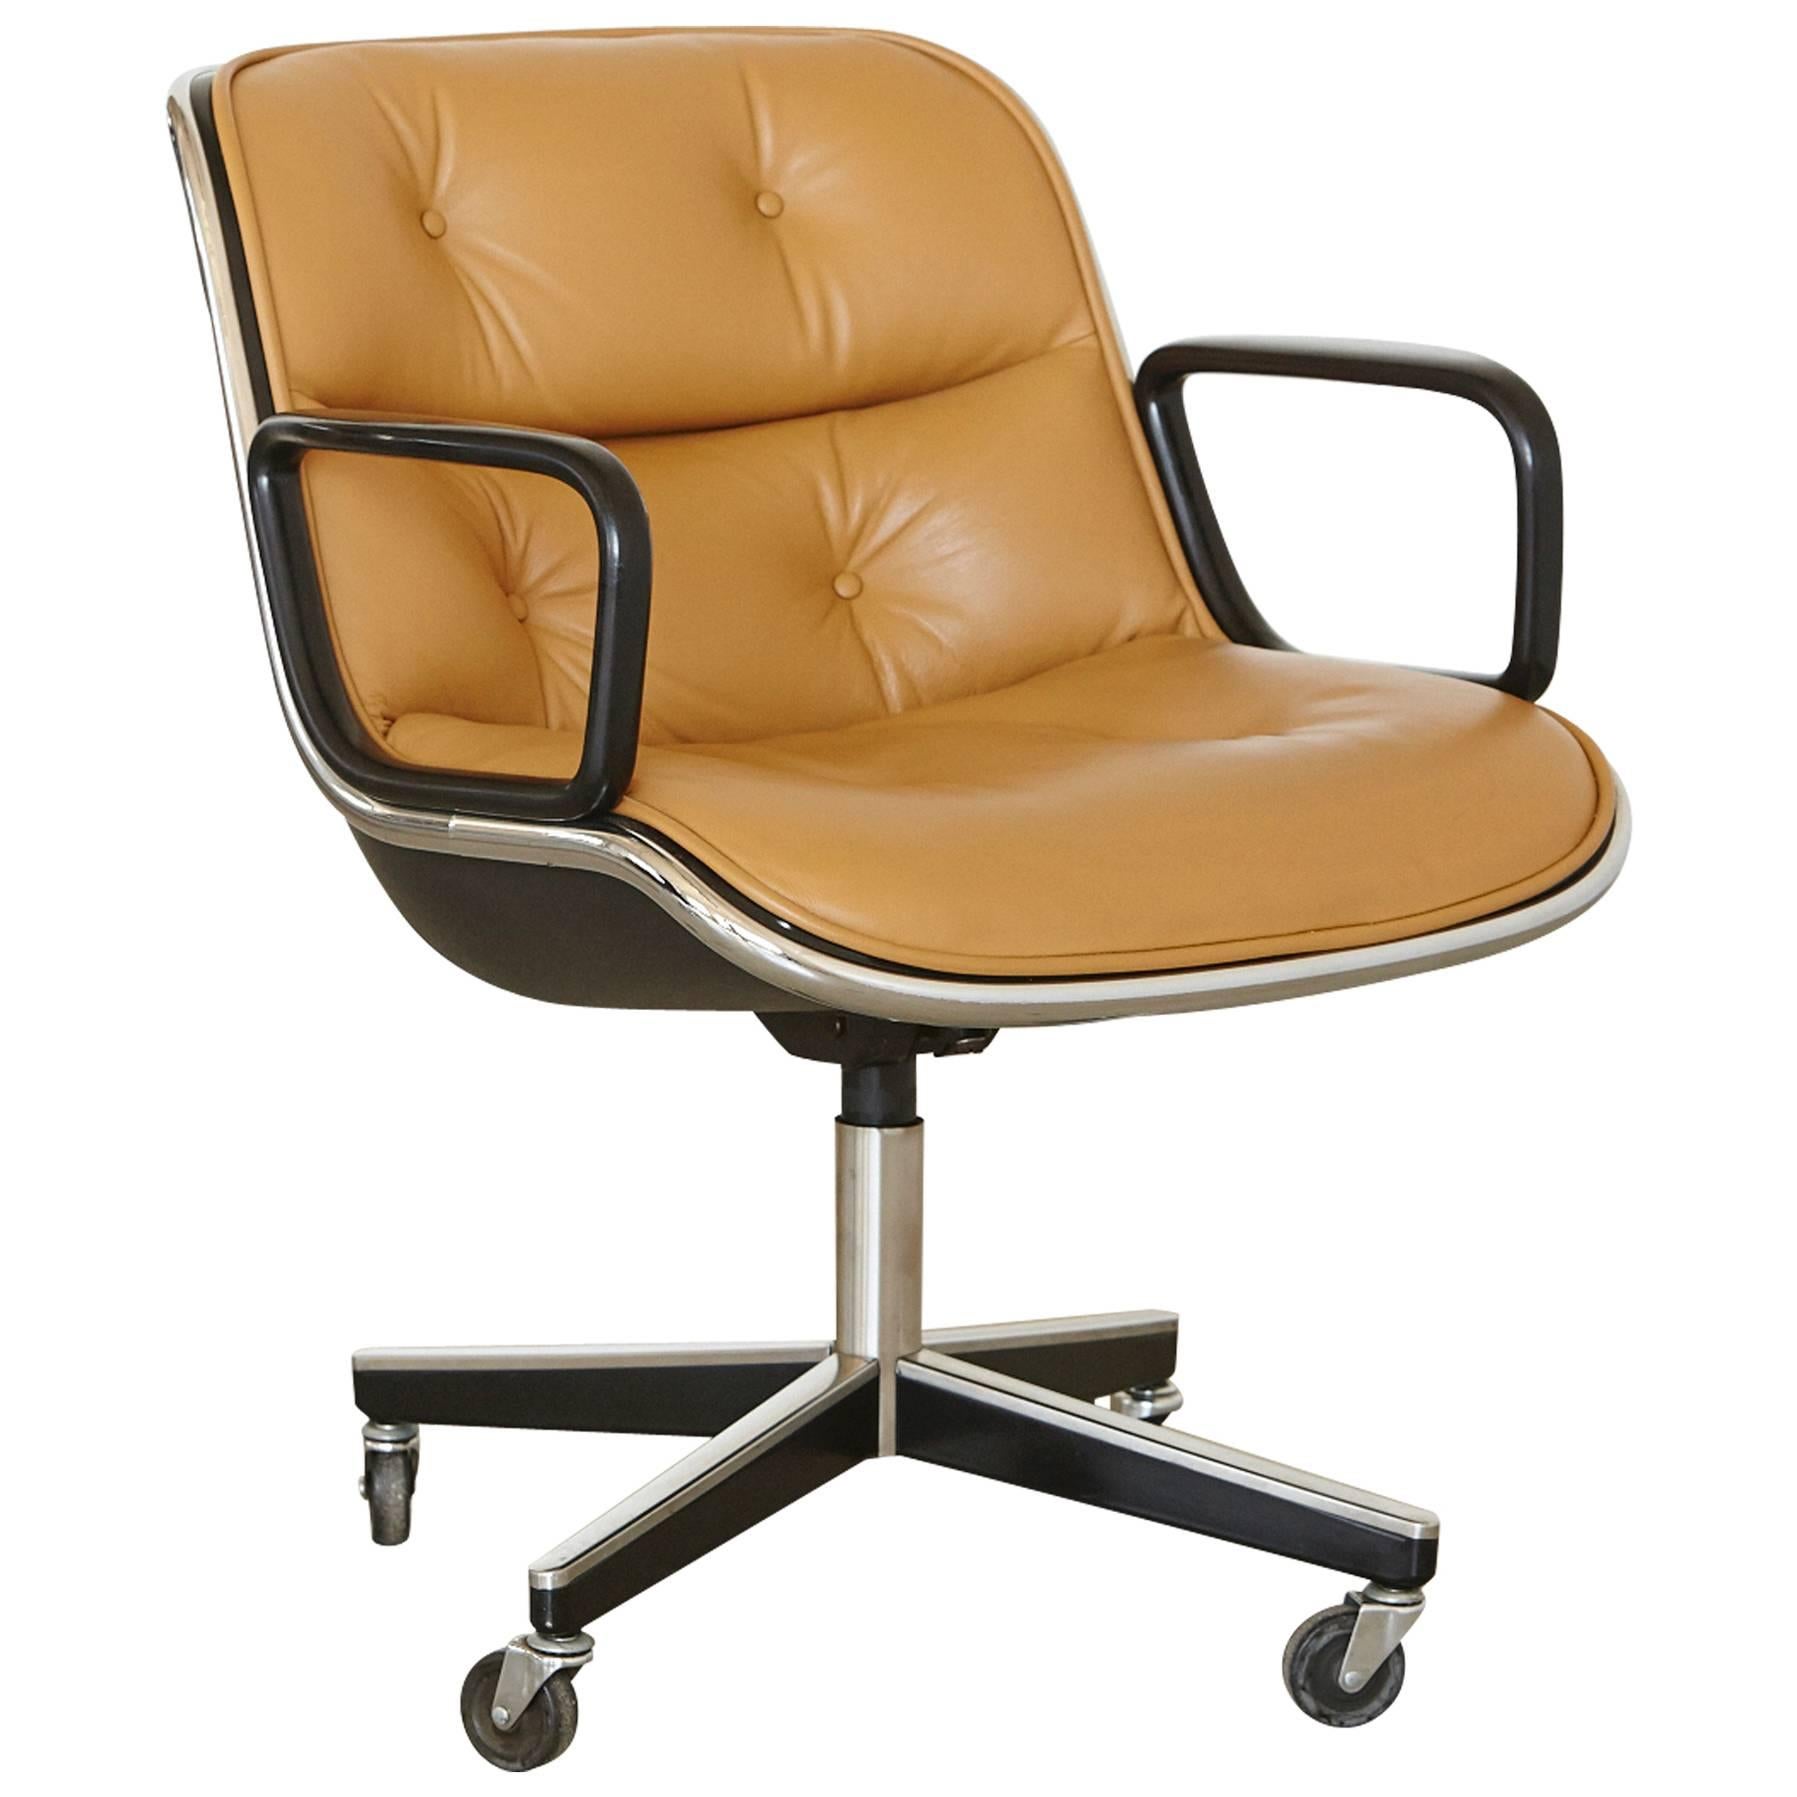 Original Charles Pollock Executive Chair Upholstered in Edelman Leather